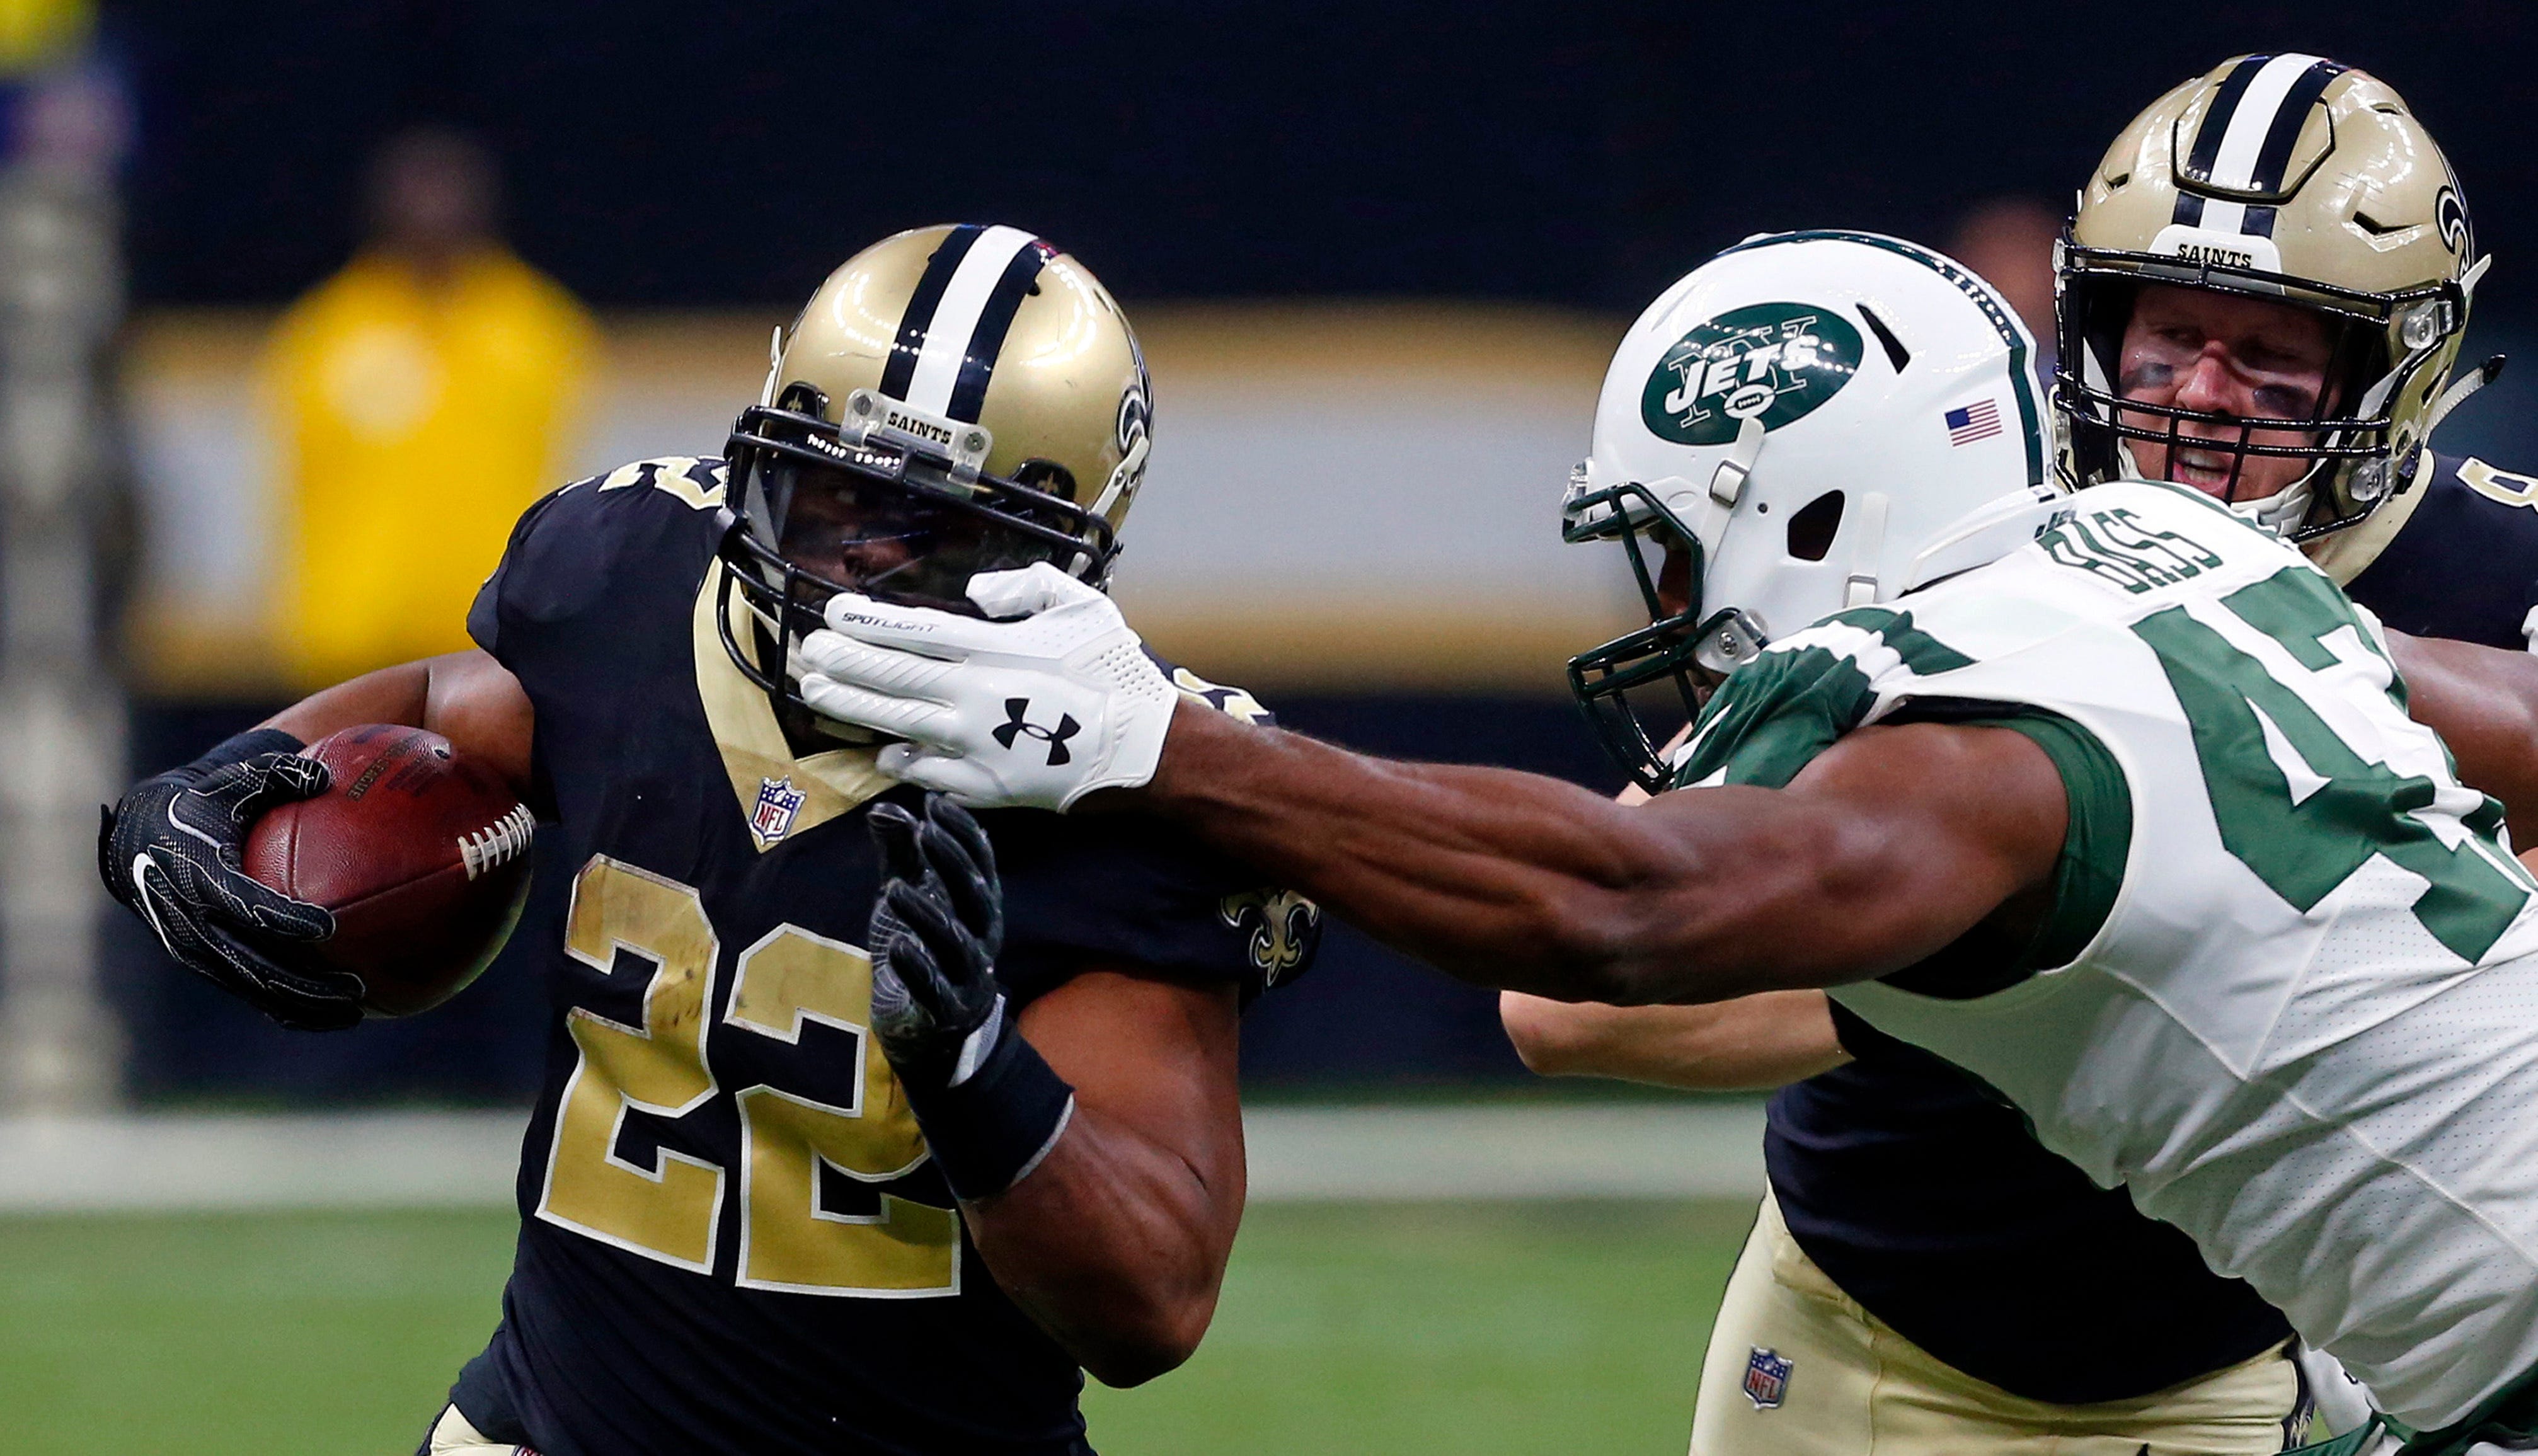 Saints ride Thomas’ clutch catches to crucial win vs. Jets – Ruth